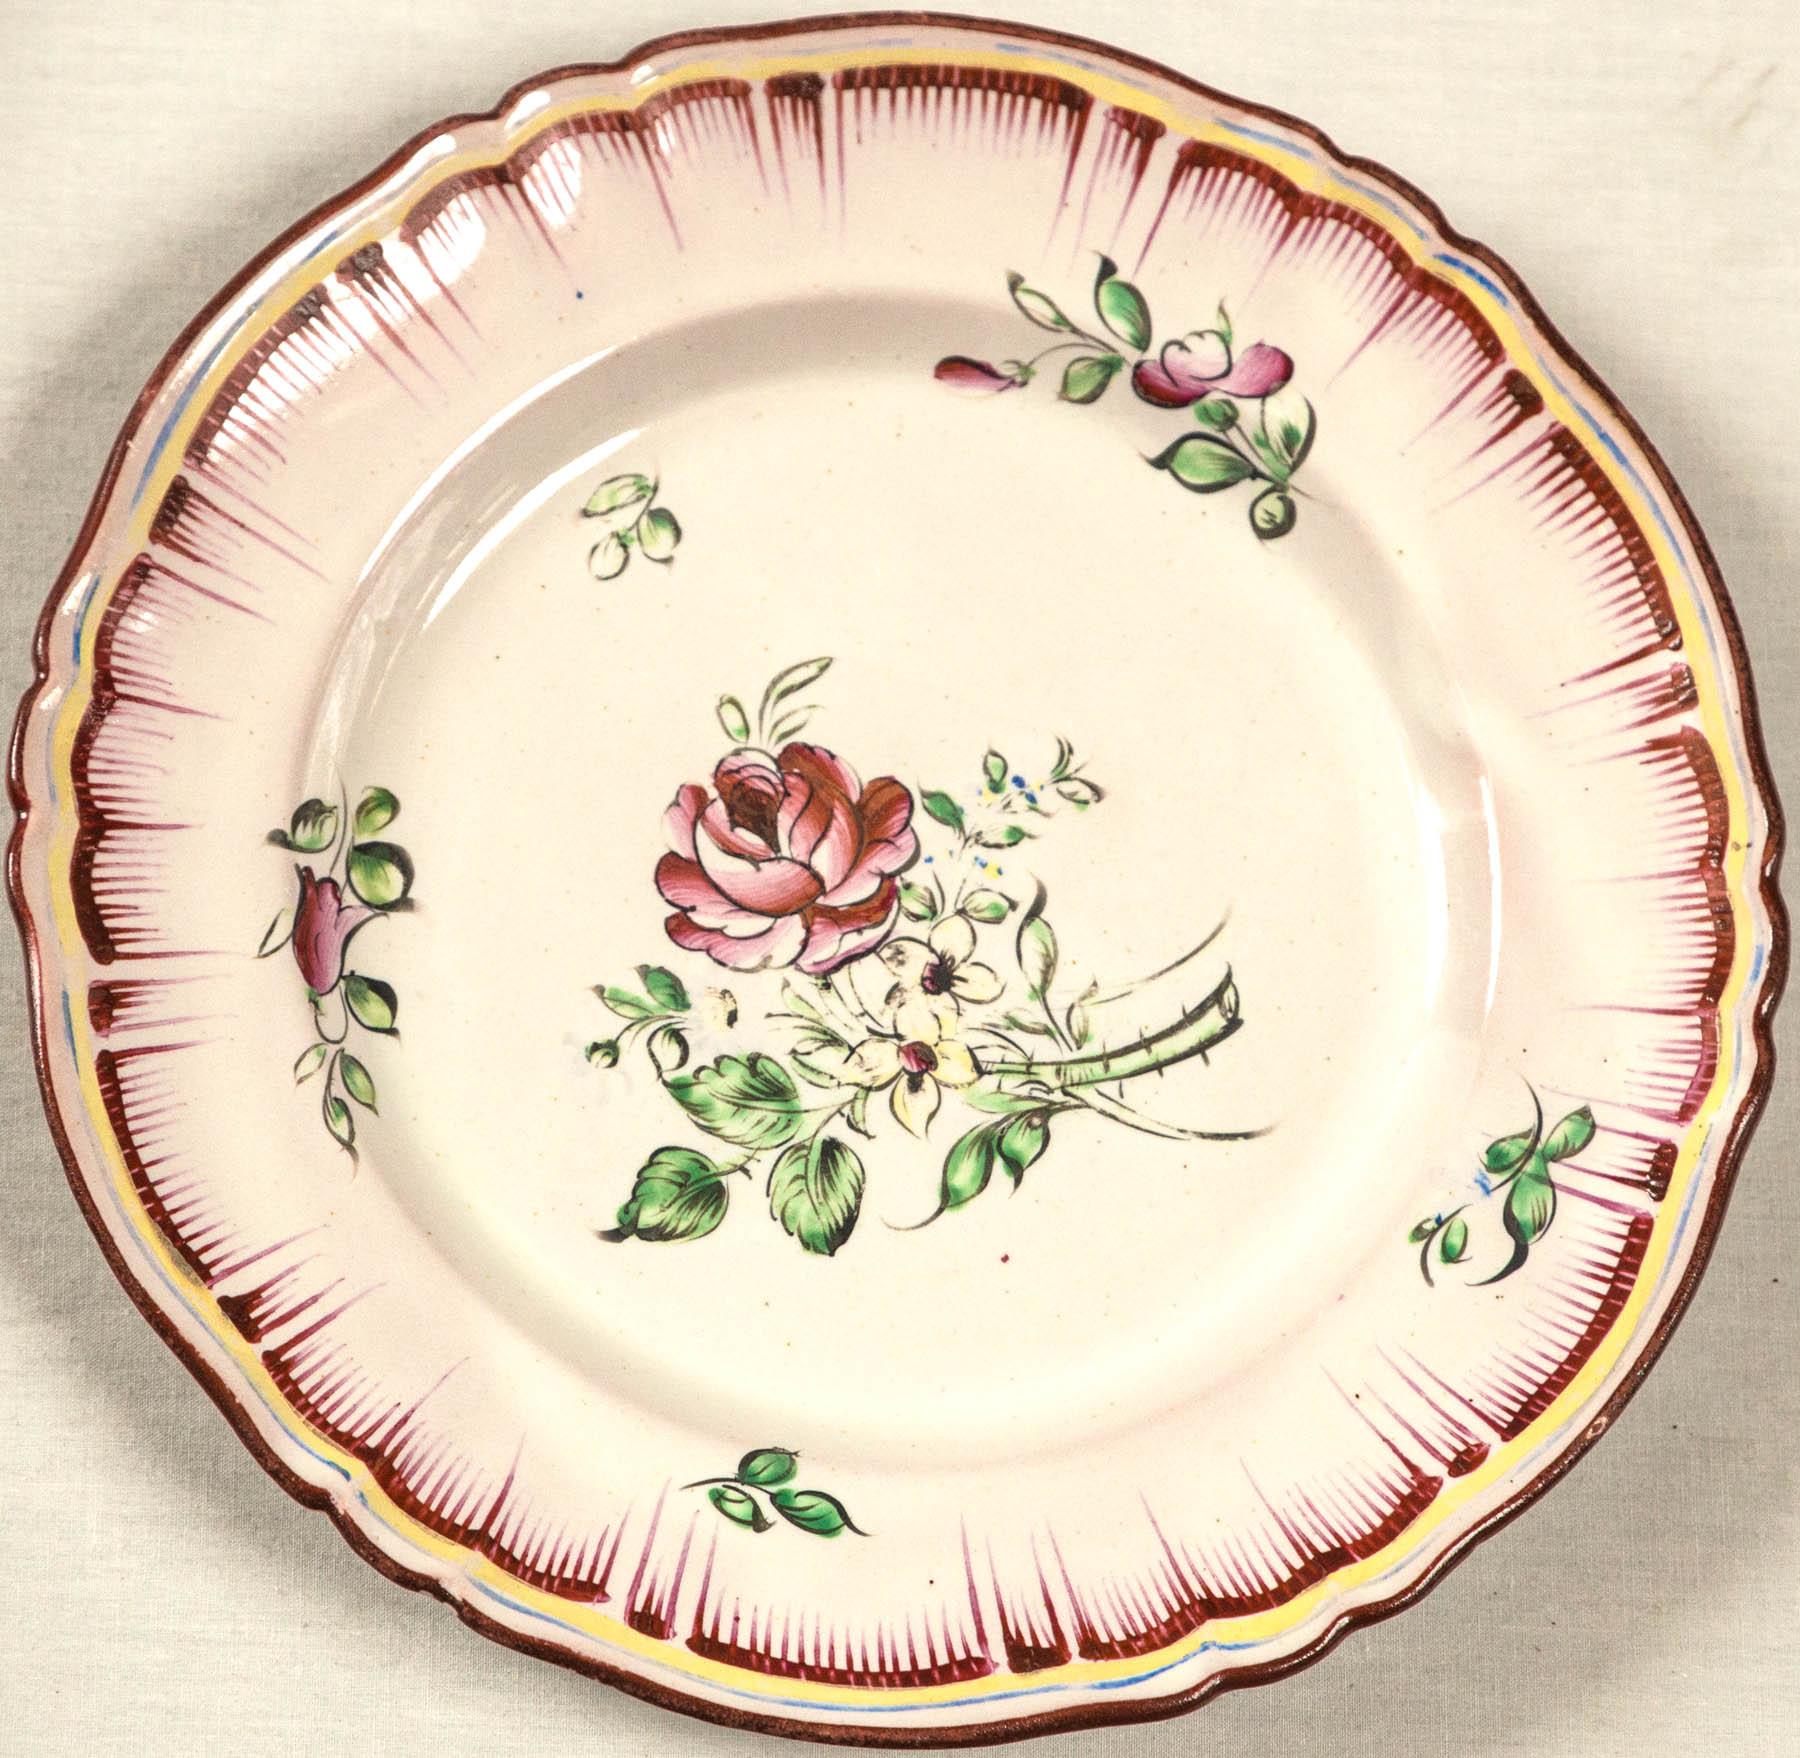 Hand-Painted Set of 7 French Faience Plates, Late 19th Century